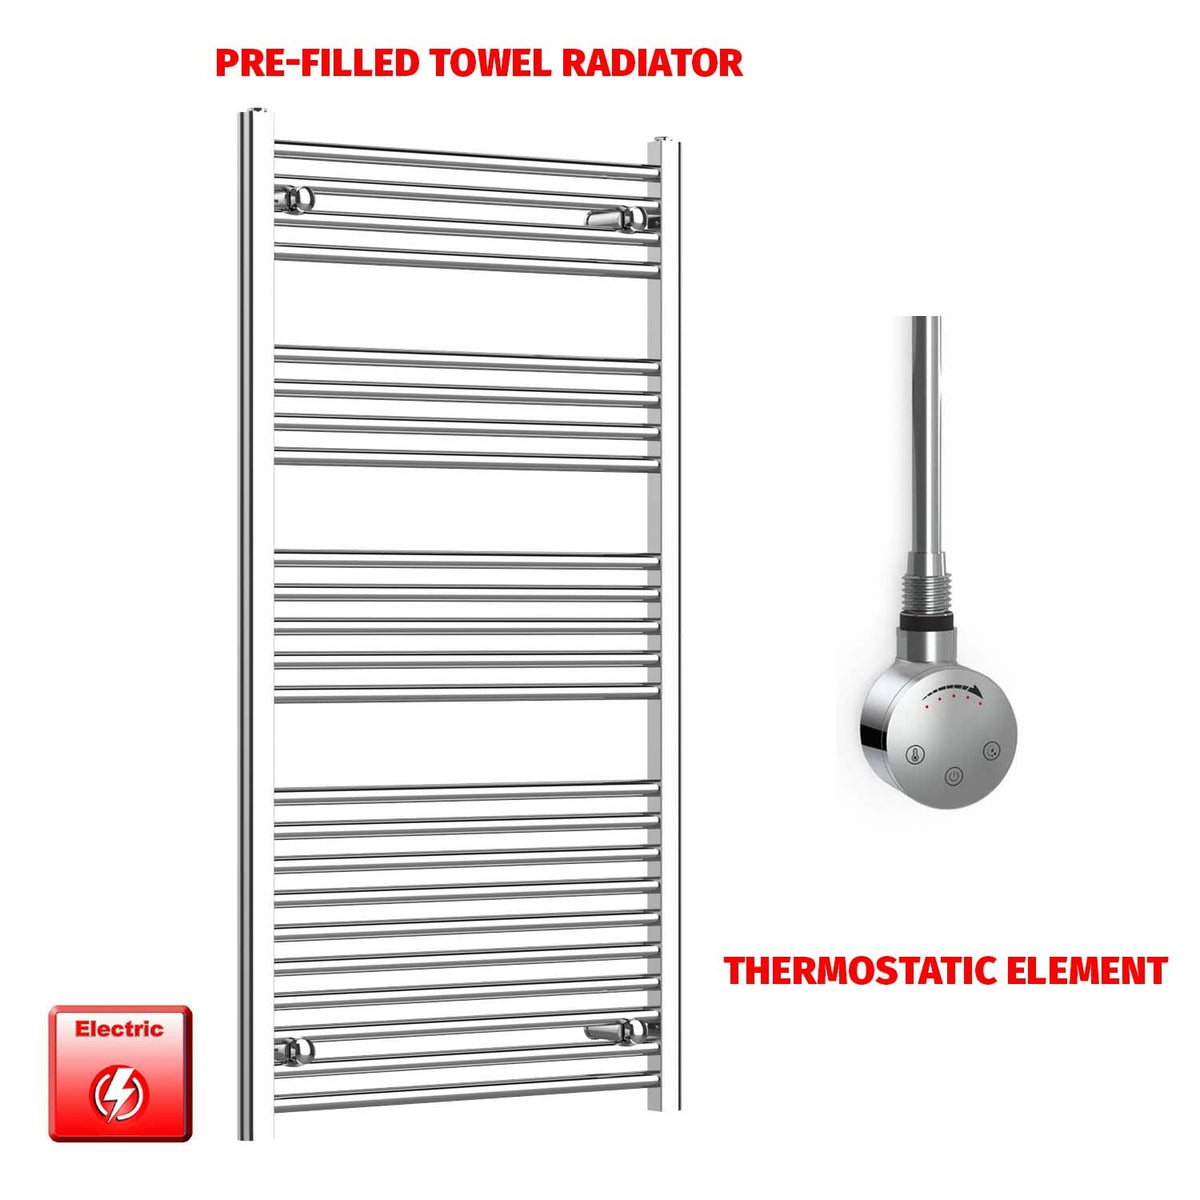 1200 x 650 Pre-Filled Electric Heated Towel Radiator Chrome HTR